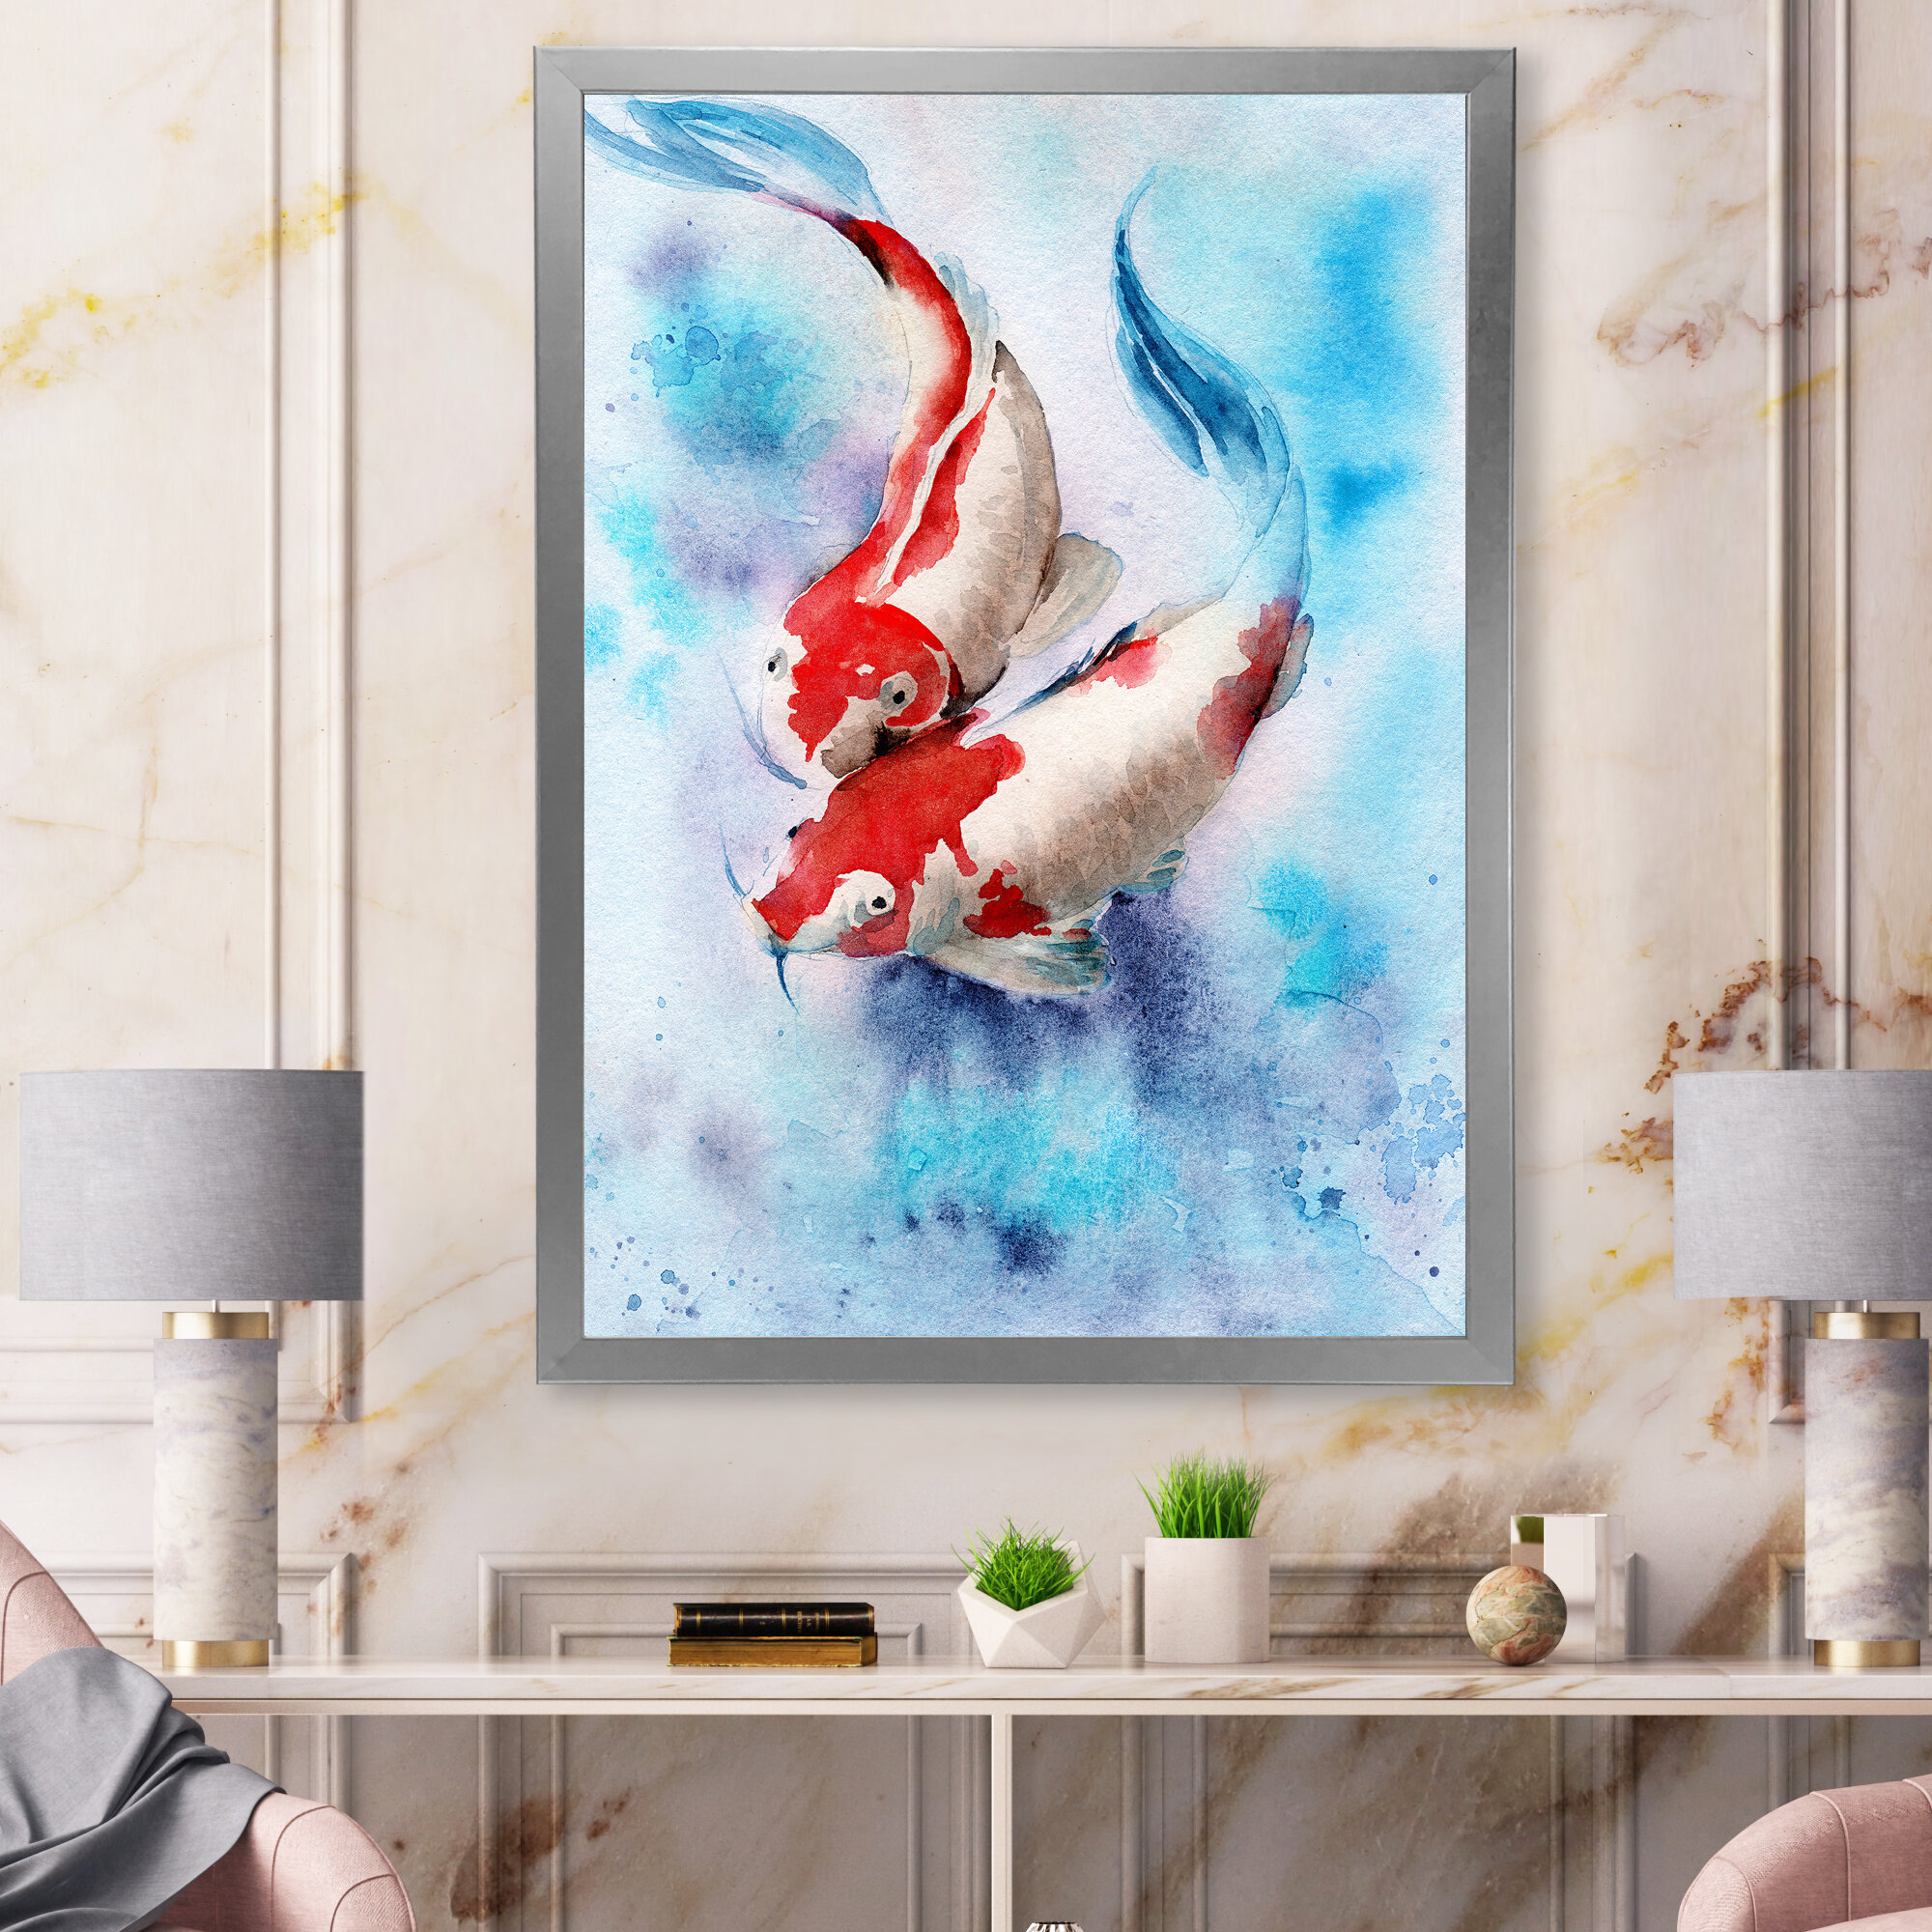 Two Koi Fish. Red Spots in Transparant Blue Water - Painting On Canvas East Urban Home Size: 40 H x 30 W, Format: Black Floater Frame Canvas